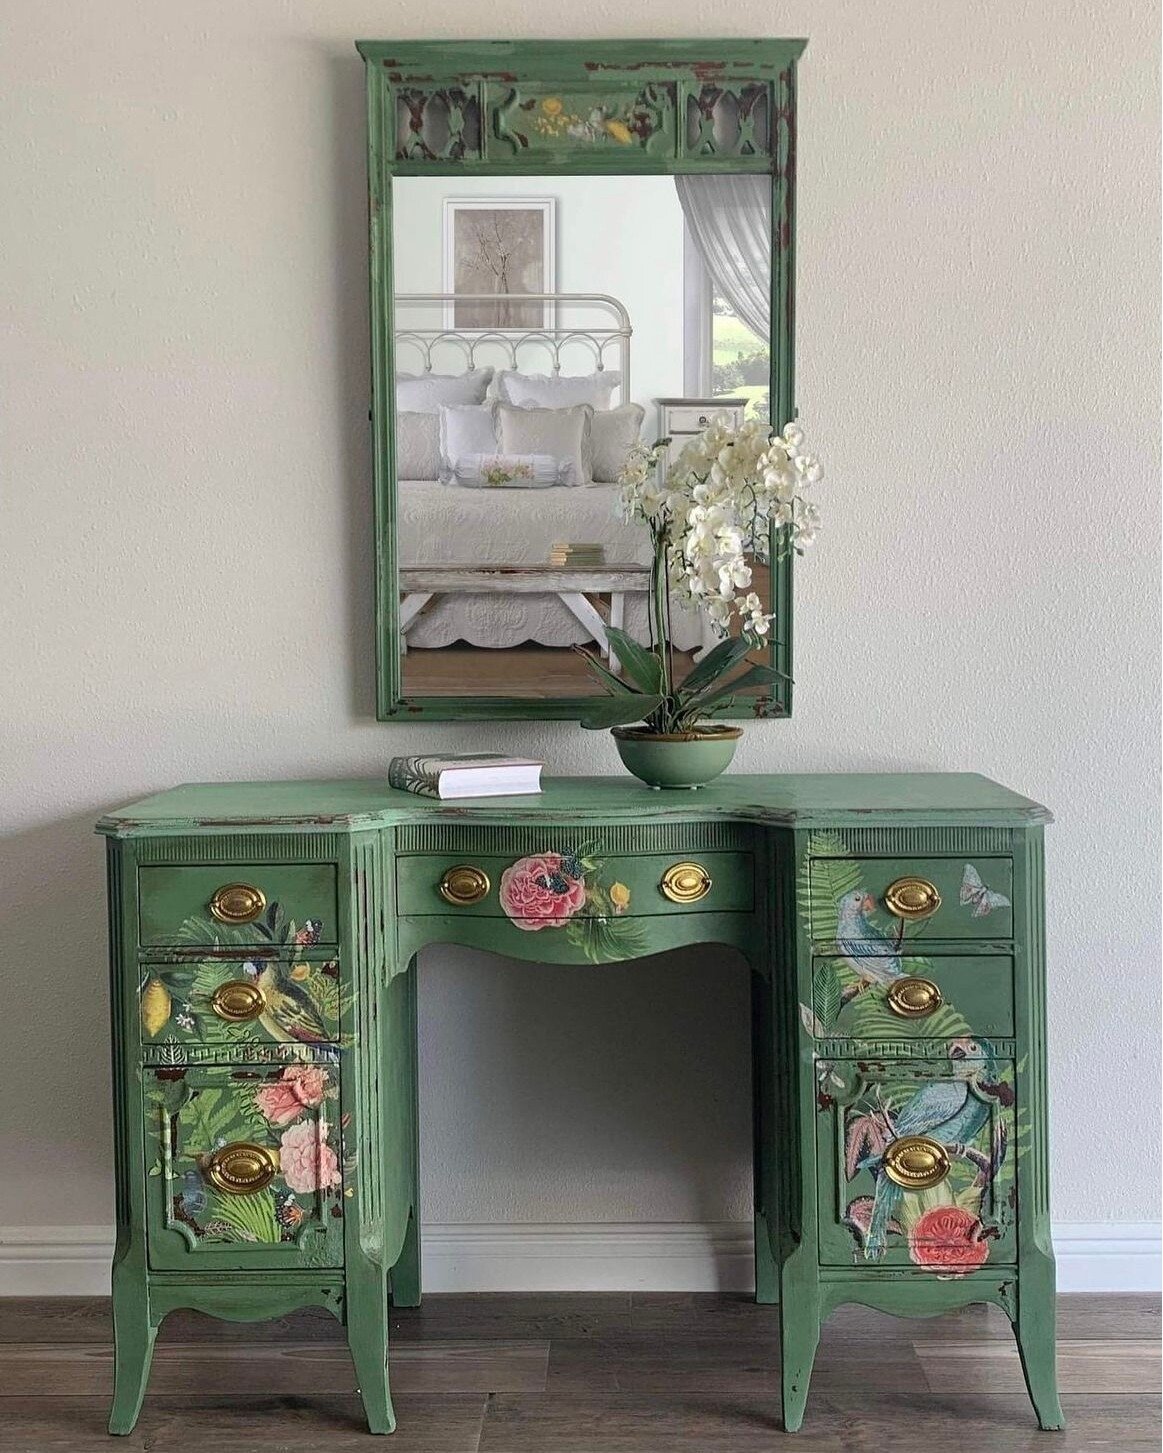 We were wowed by this chippy furniture makeover by @relovedbylori. Boxwood is perfect for adding vintage charm to any piece!

Shop or find a retailer at the link in our bio! 

#mmsmilkpaint #milkpaint #mmsmp #paintedfurniture #homedecor #missmustards